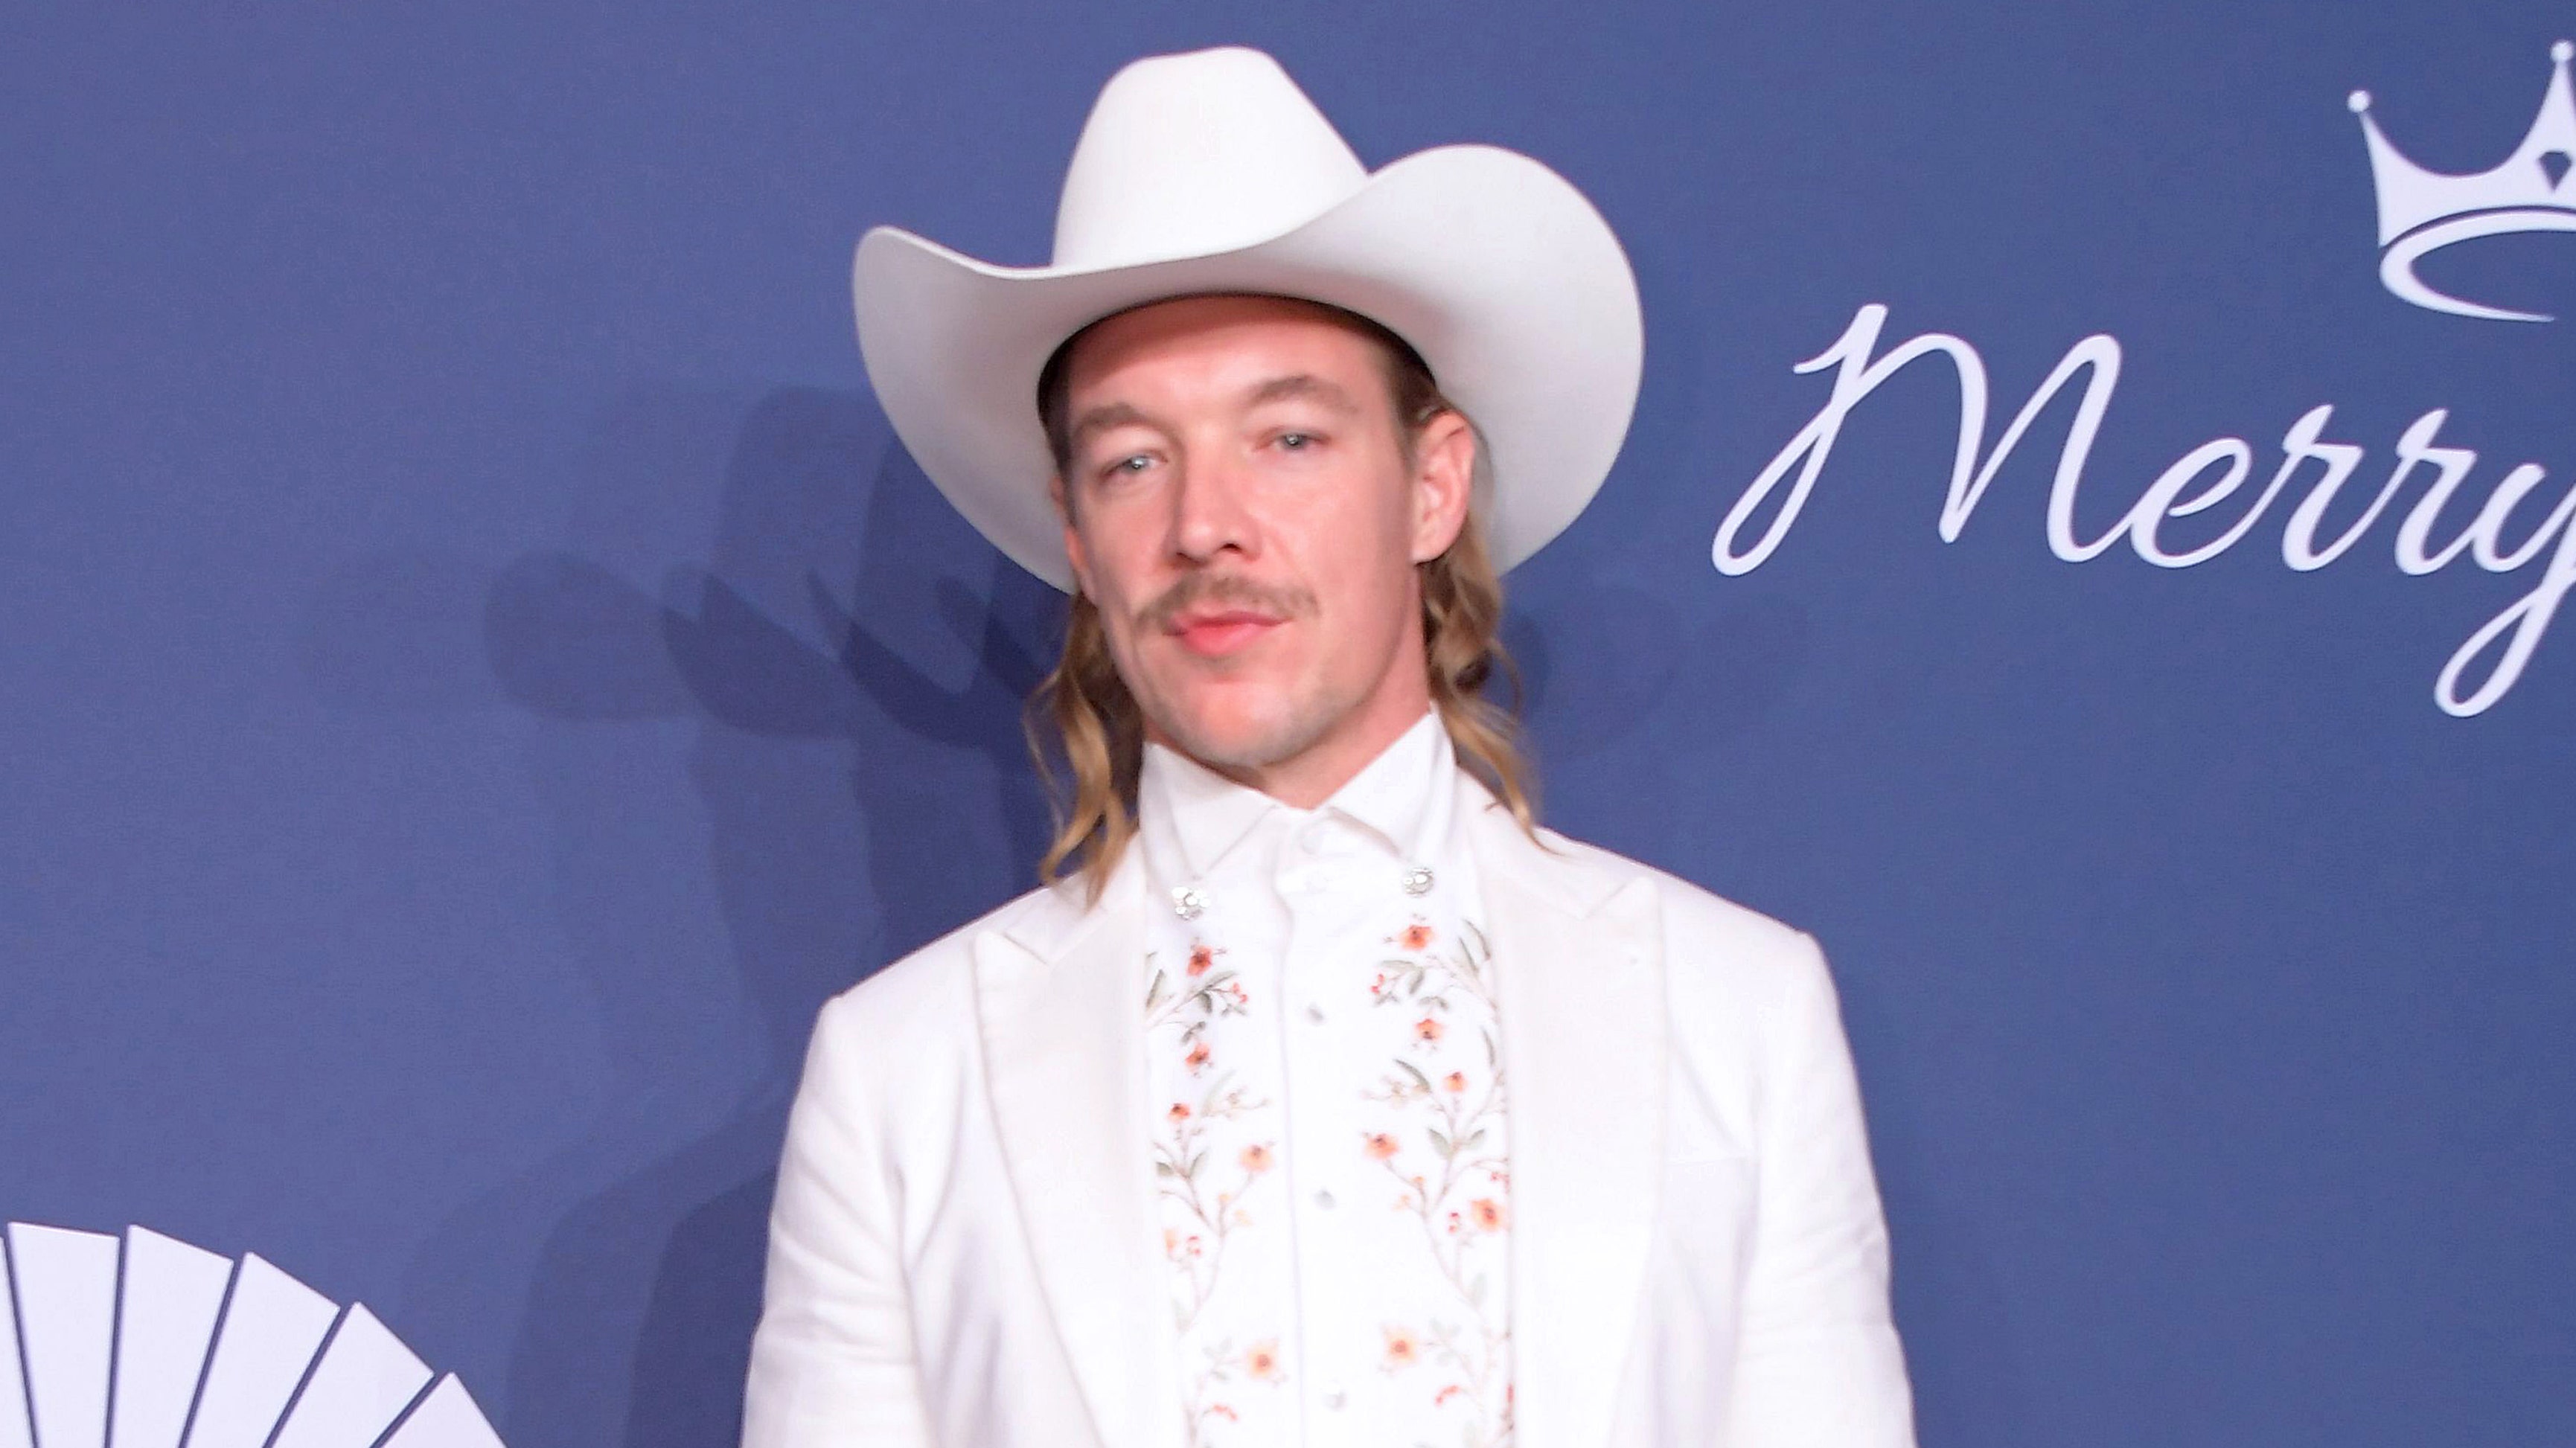 Diplo could face criminal charges over rape and sexual misconduct claims